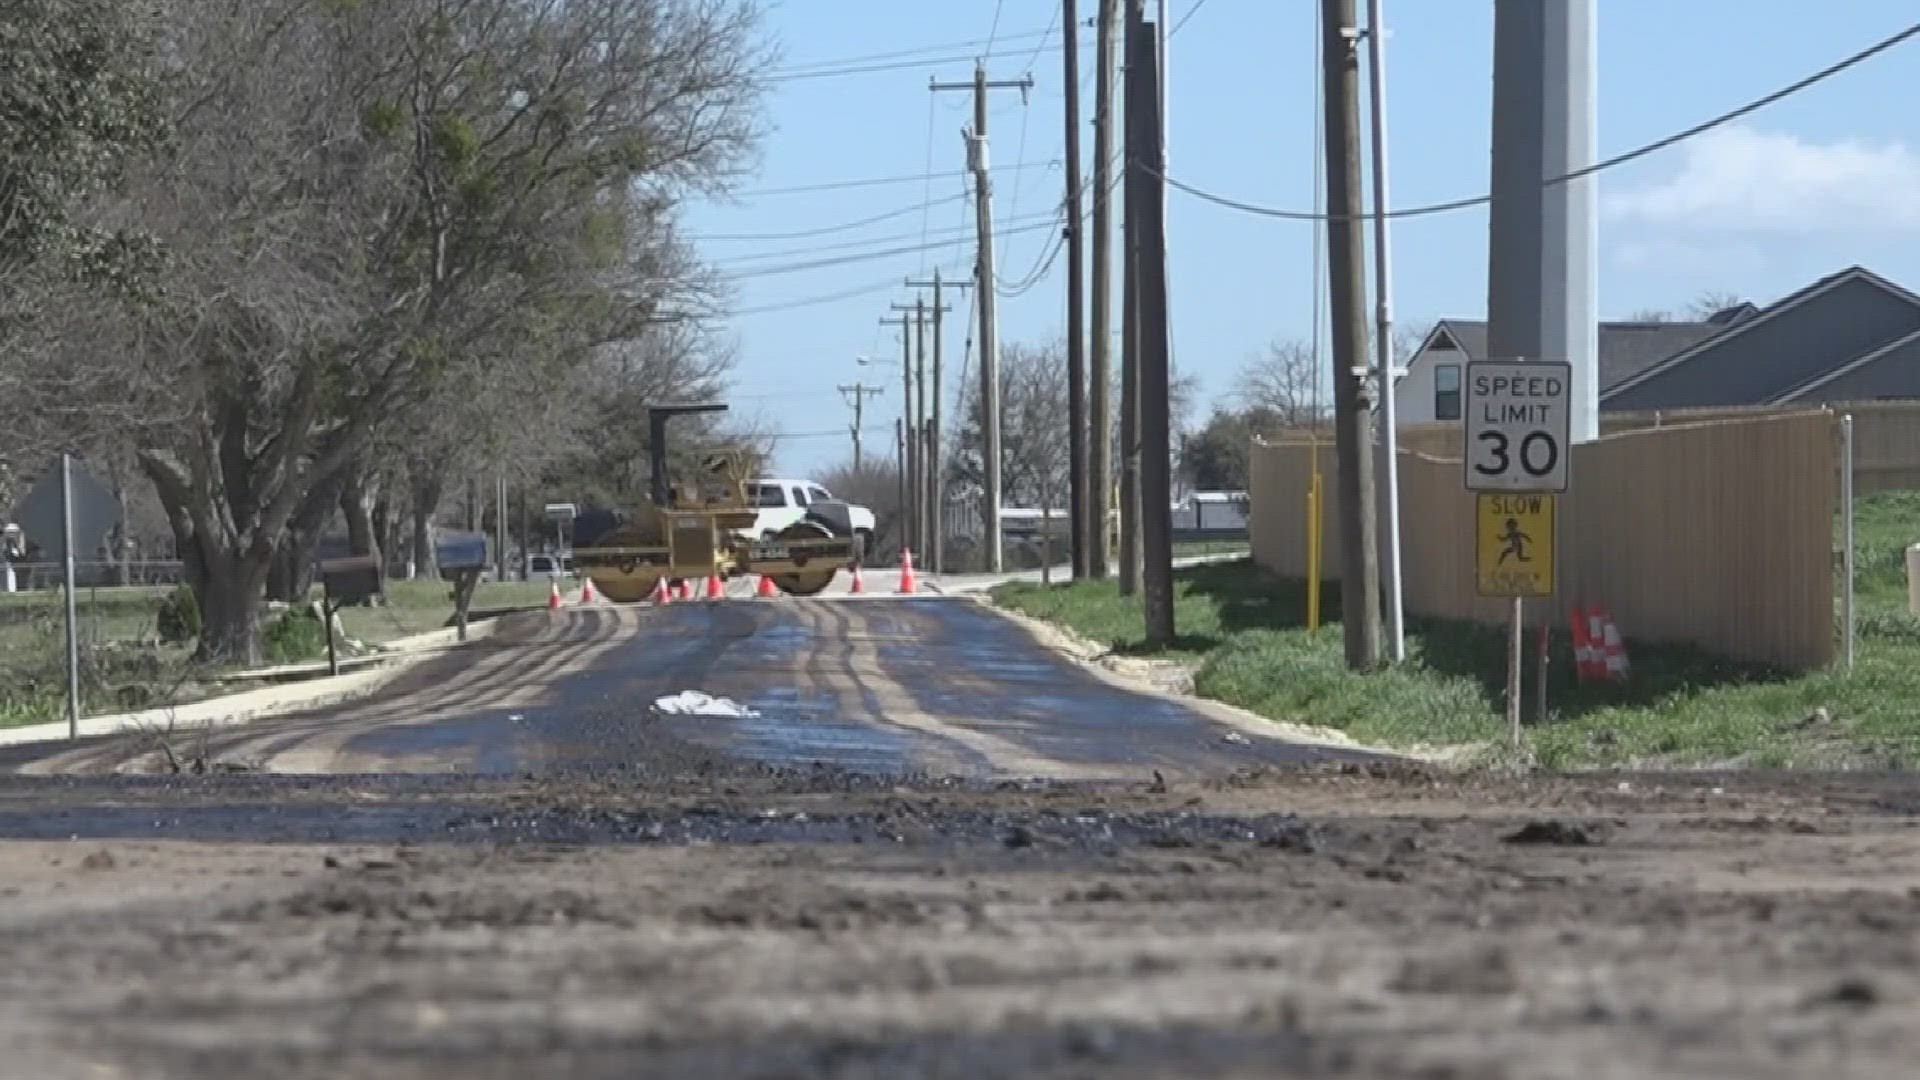 Temporary repairs have been made to Goates Road in Troy, fixing potholes that have damaged residents' cars.